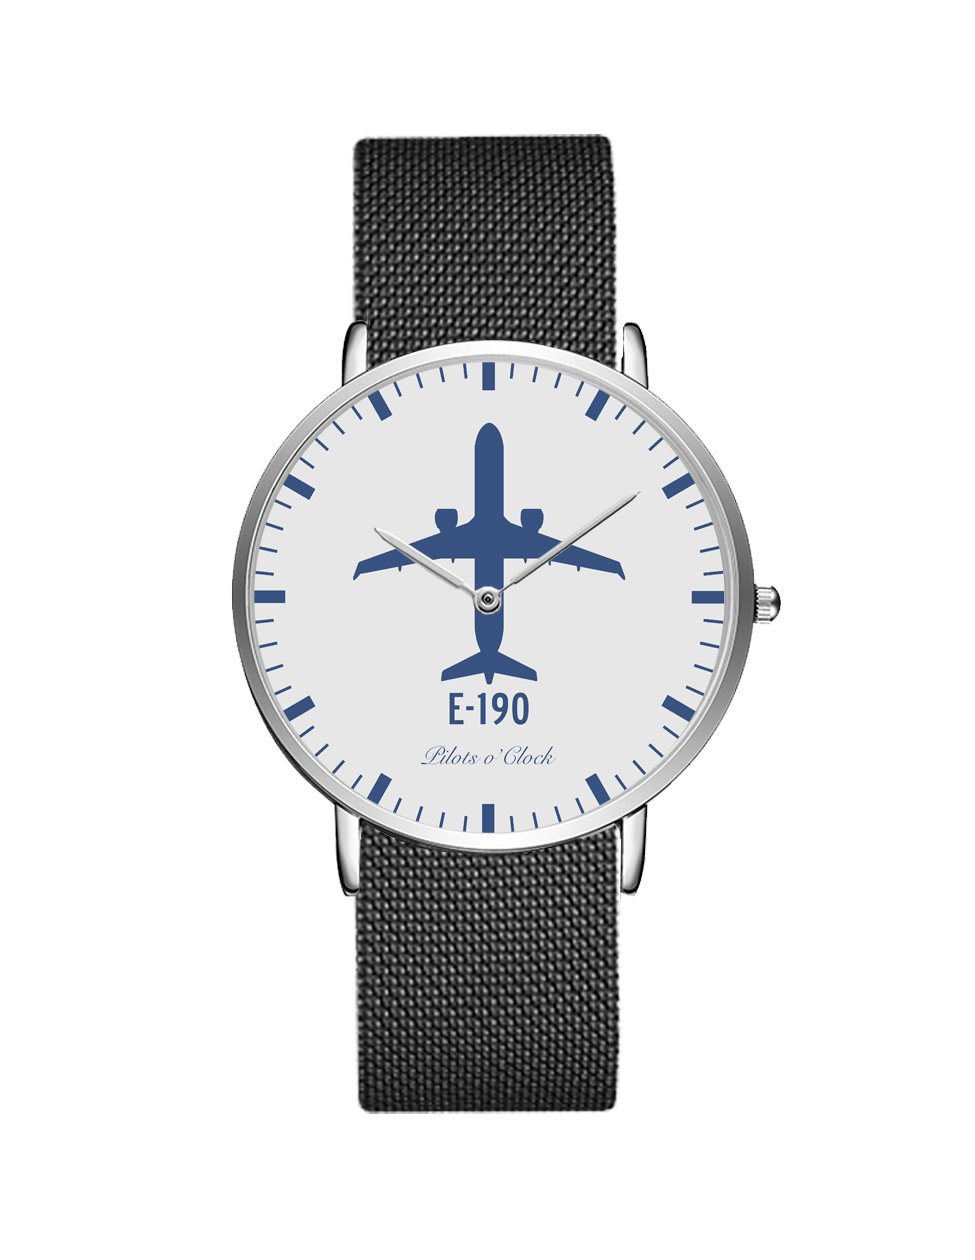 Embraer E190 Stainless Steel Strap Watches Pilot Eyes Store Silver & Black Stainless Steel Strap 